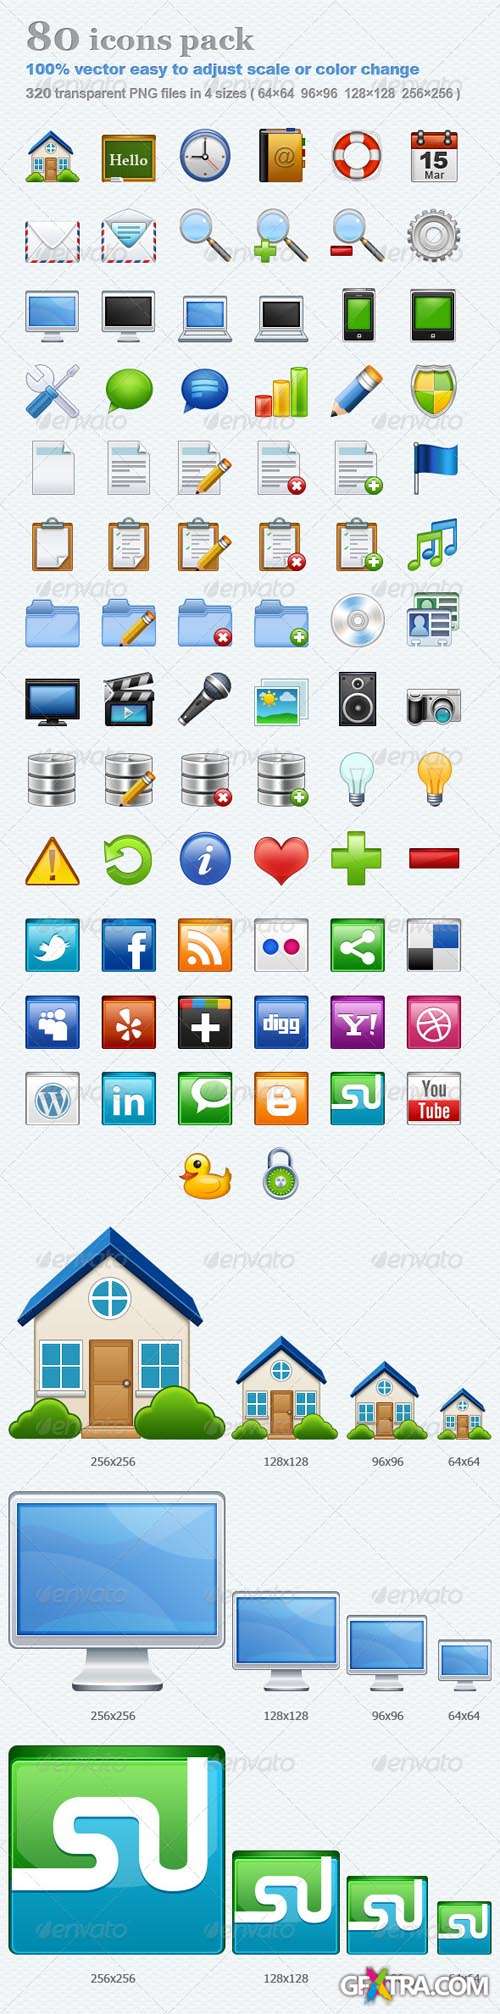 Graphicriver: 80 Icons Pack